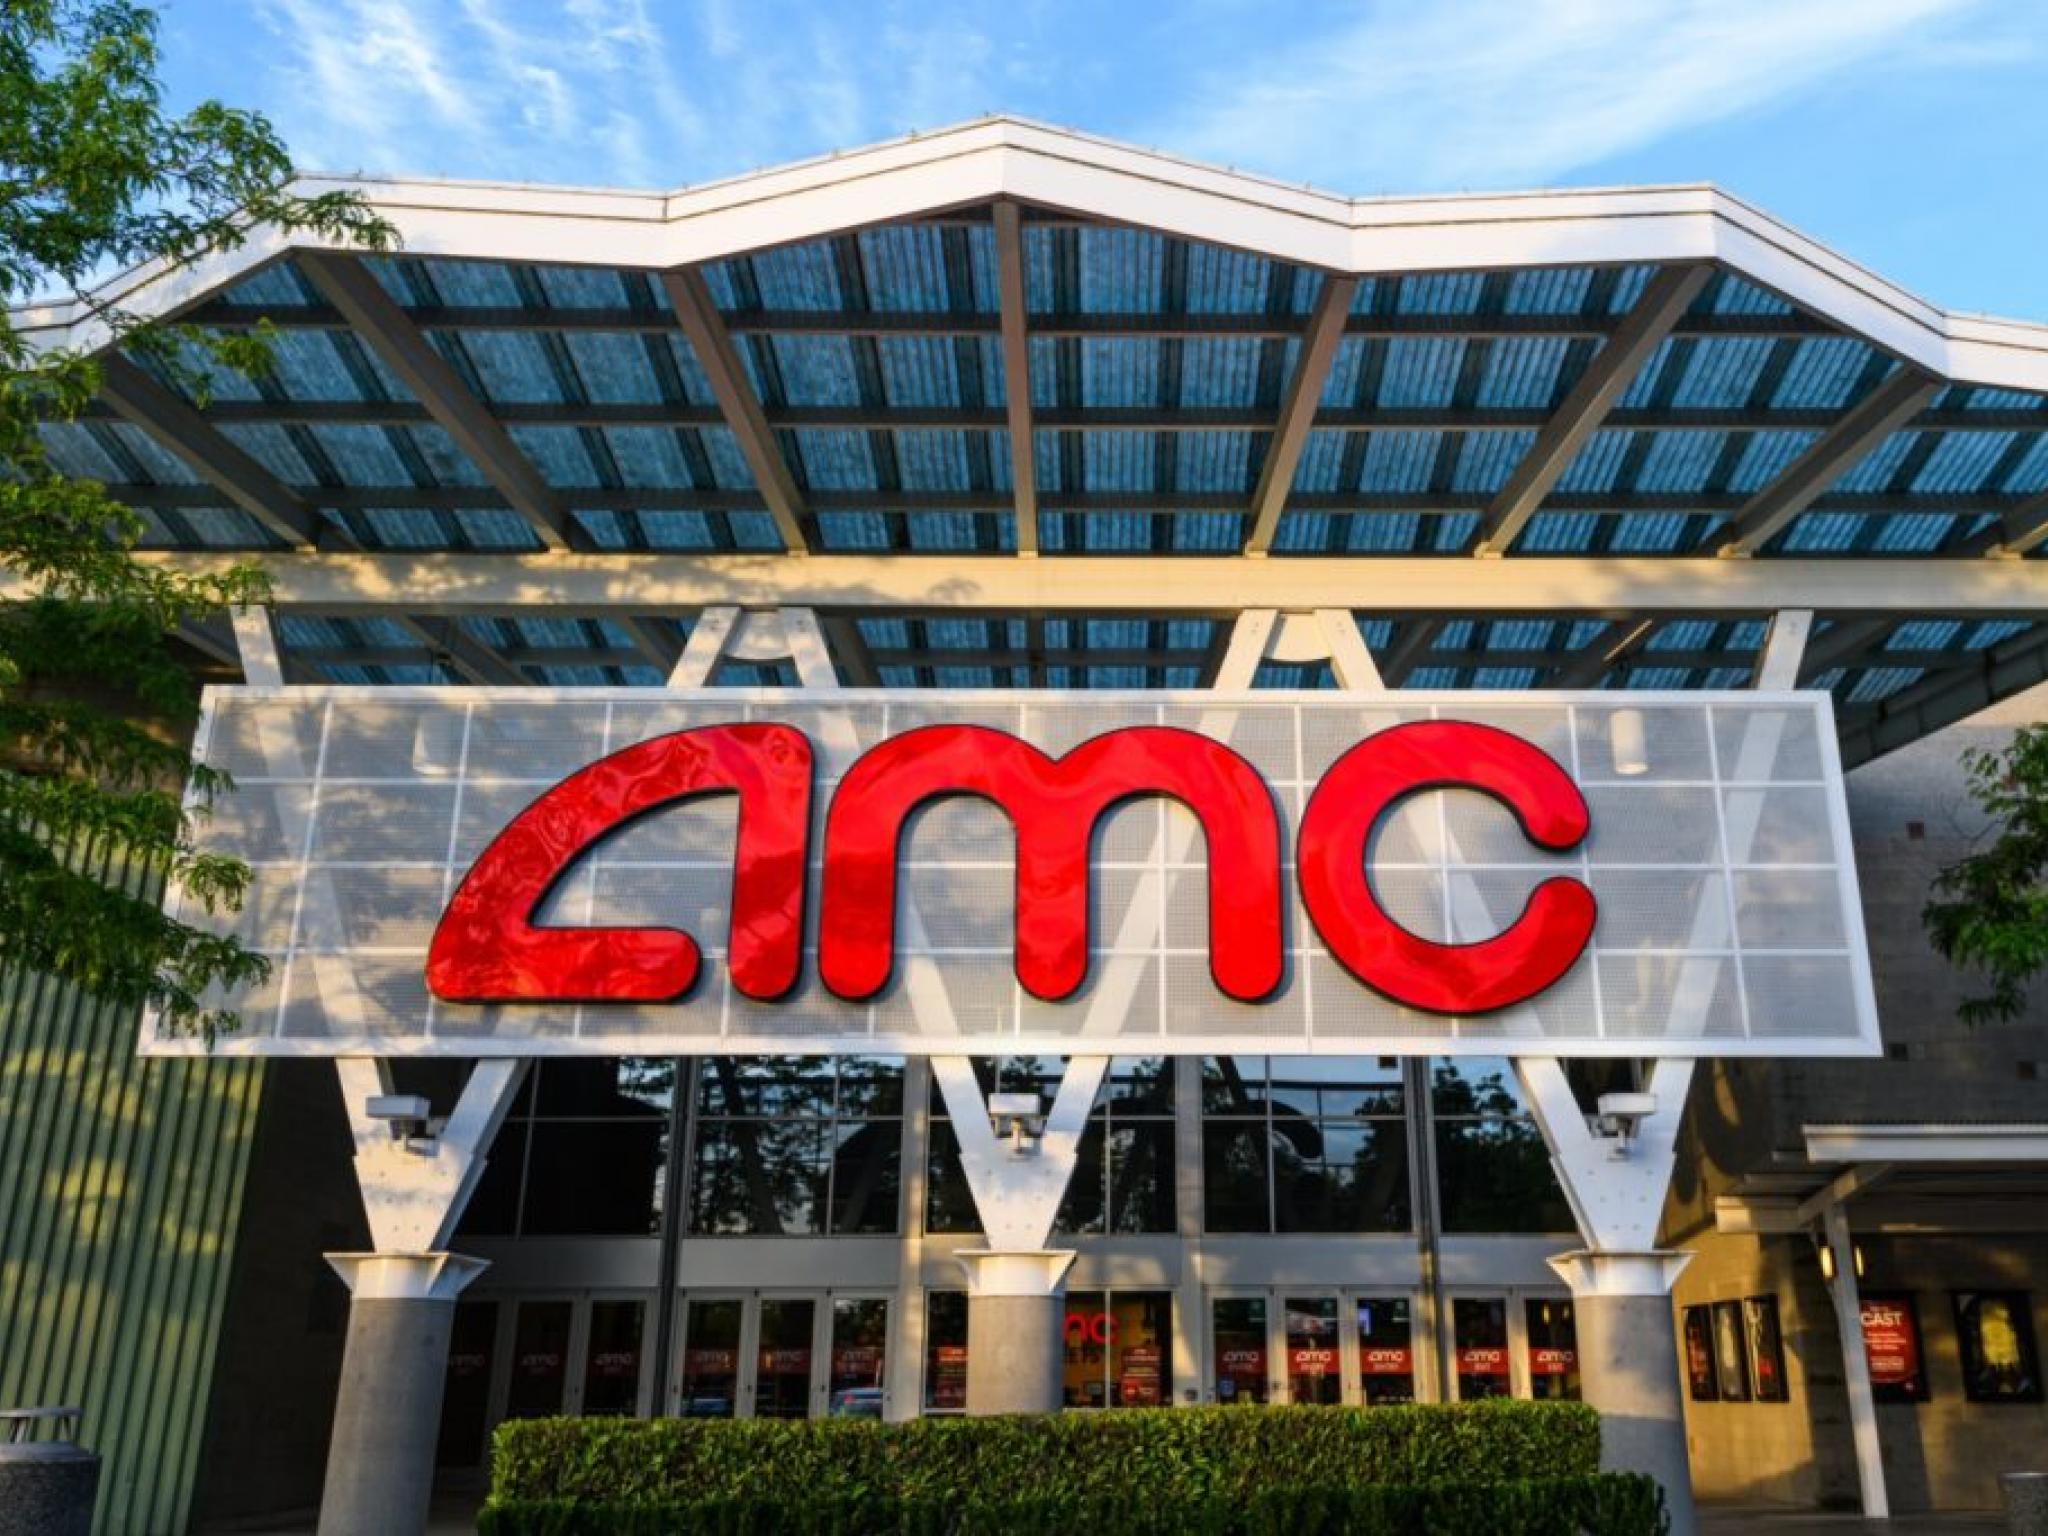  amc-stock-rises-as-annual-shareholder-meeting-results-roll-in-whats-going-on 